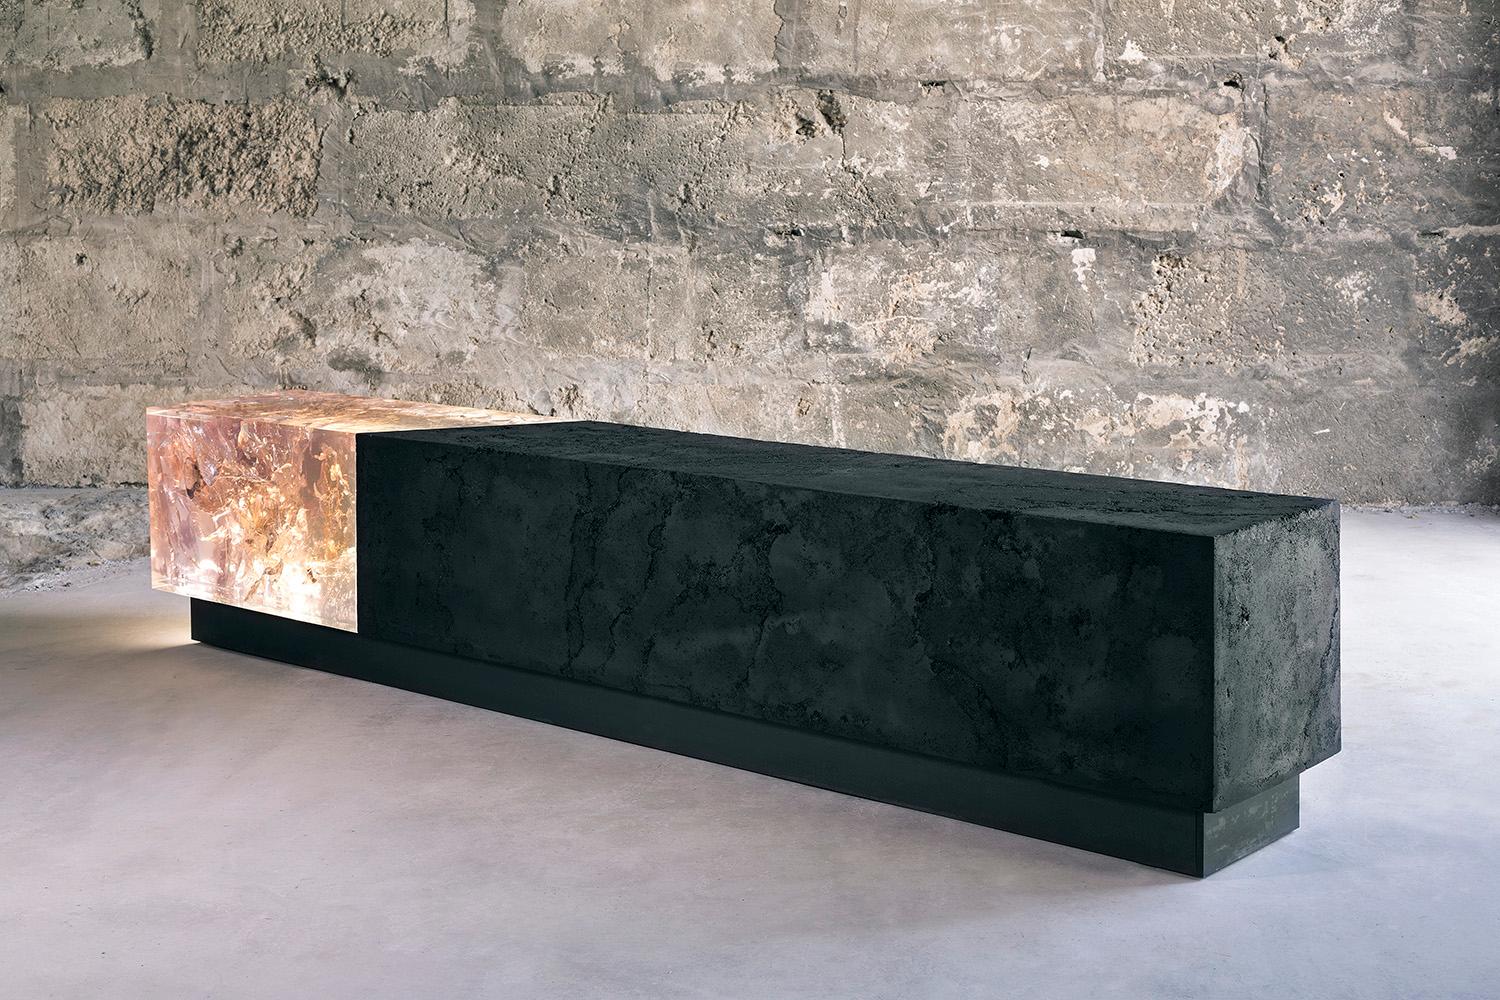 Counterpart by Tom Price - large sculpture and bench, 7.2ft wide For Sale 4